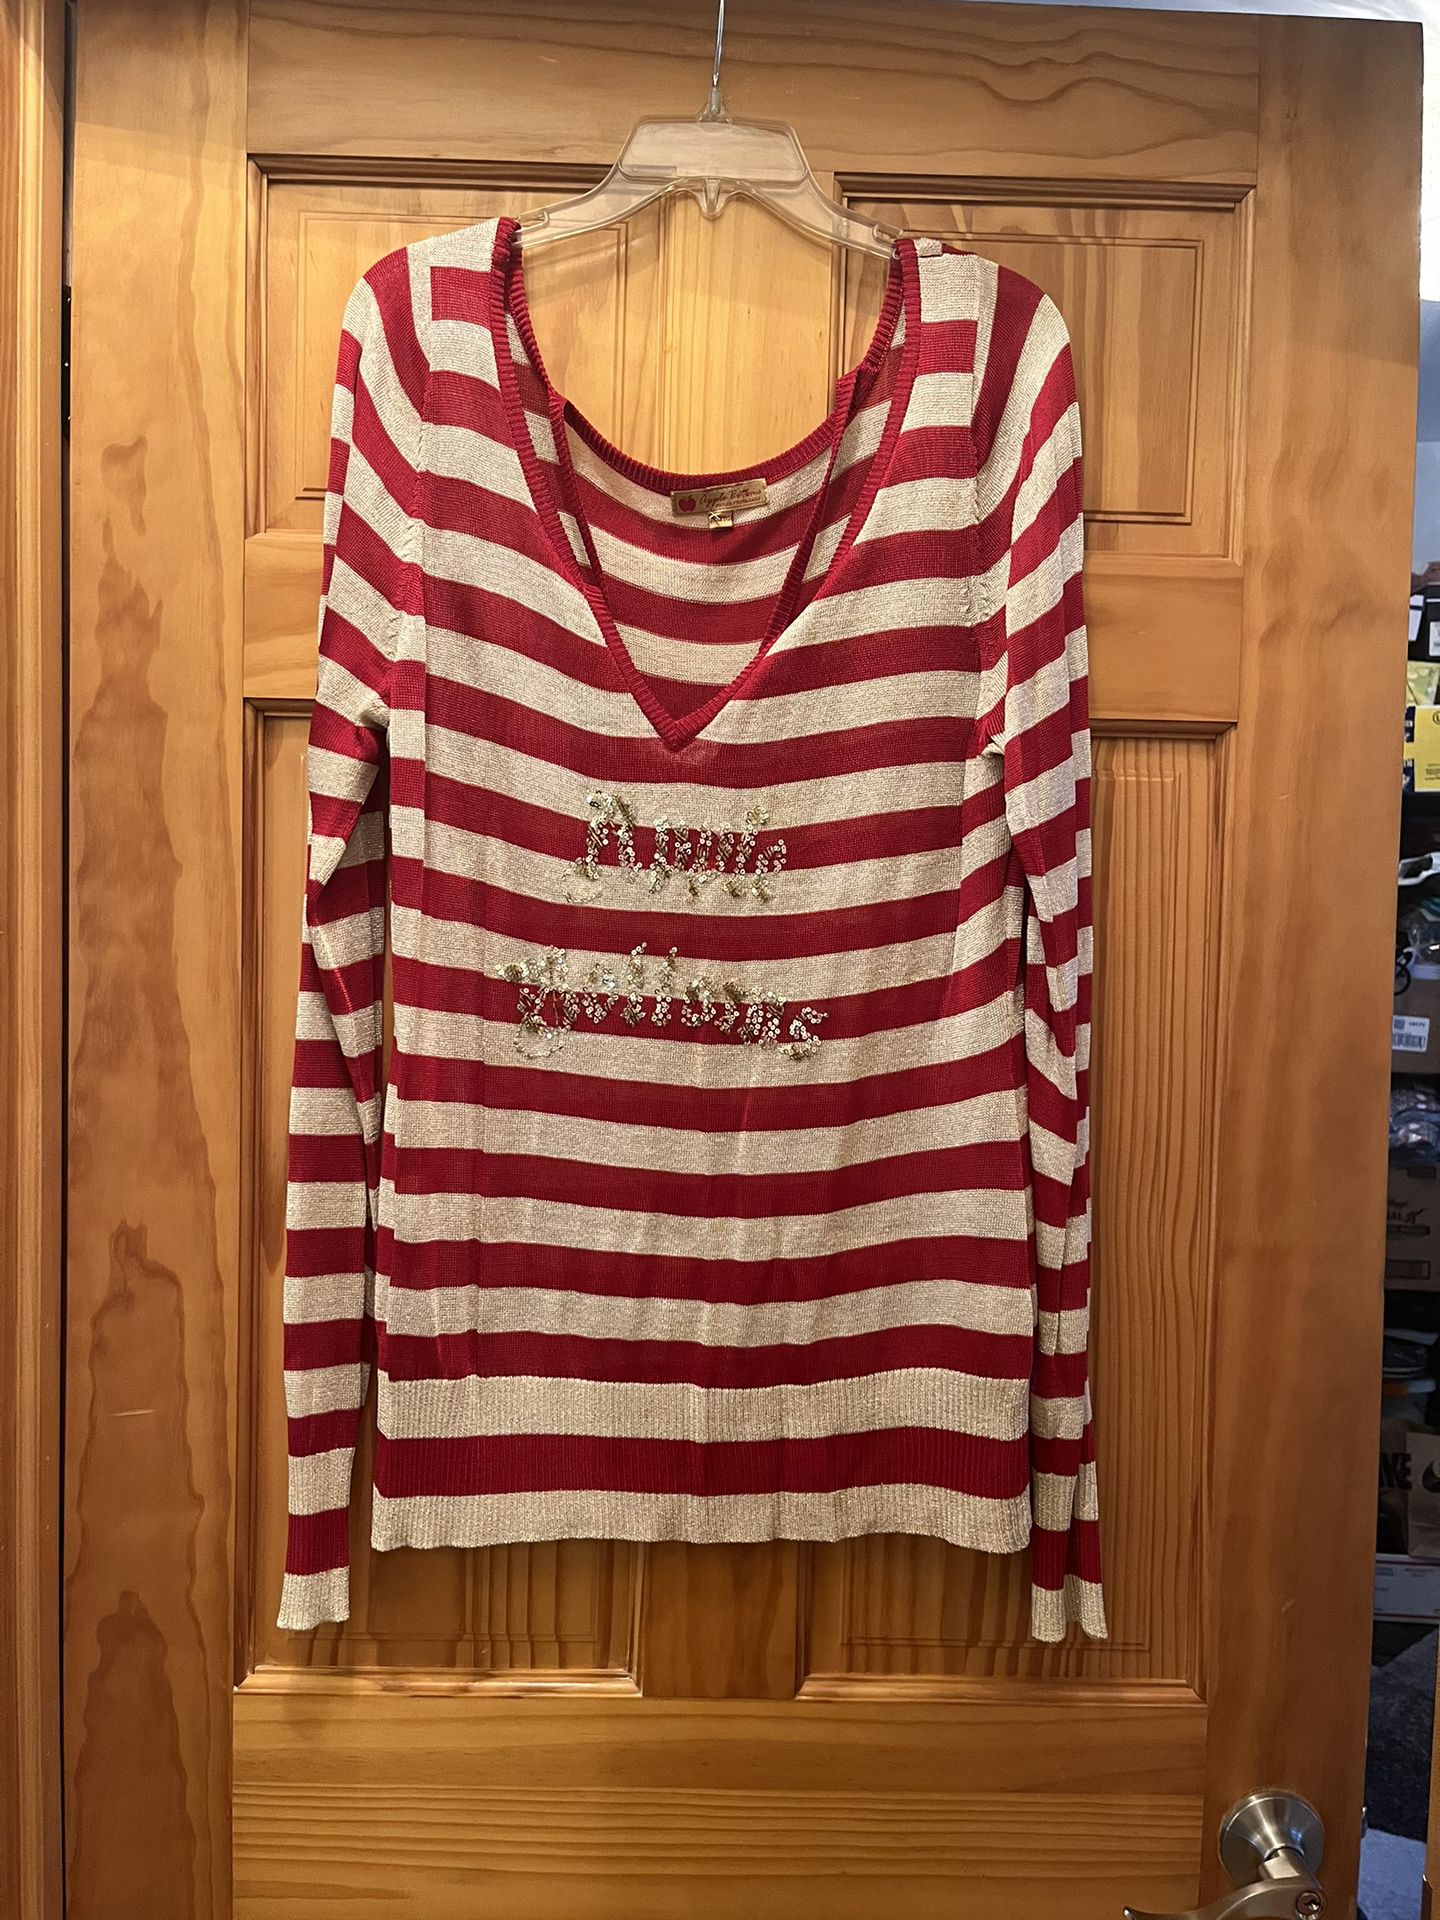 Very pretty apple bottom shirt for women. Red and gold stripes. In great condition. Size 2 xl